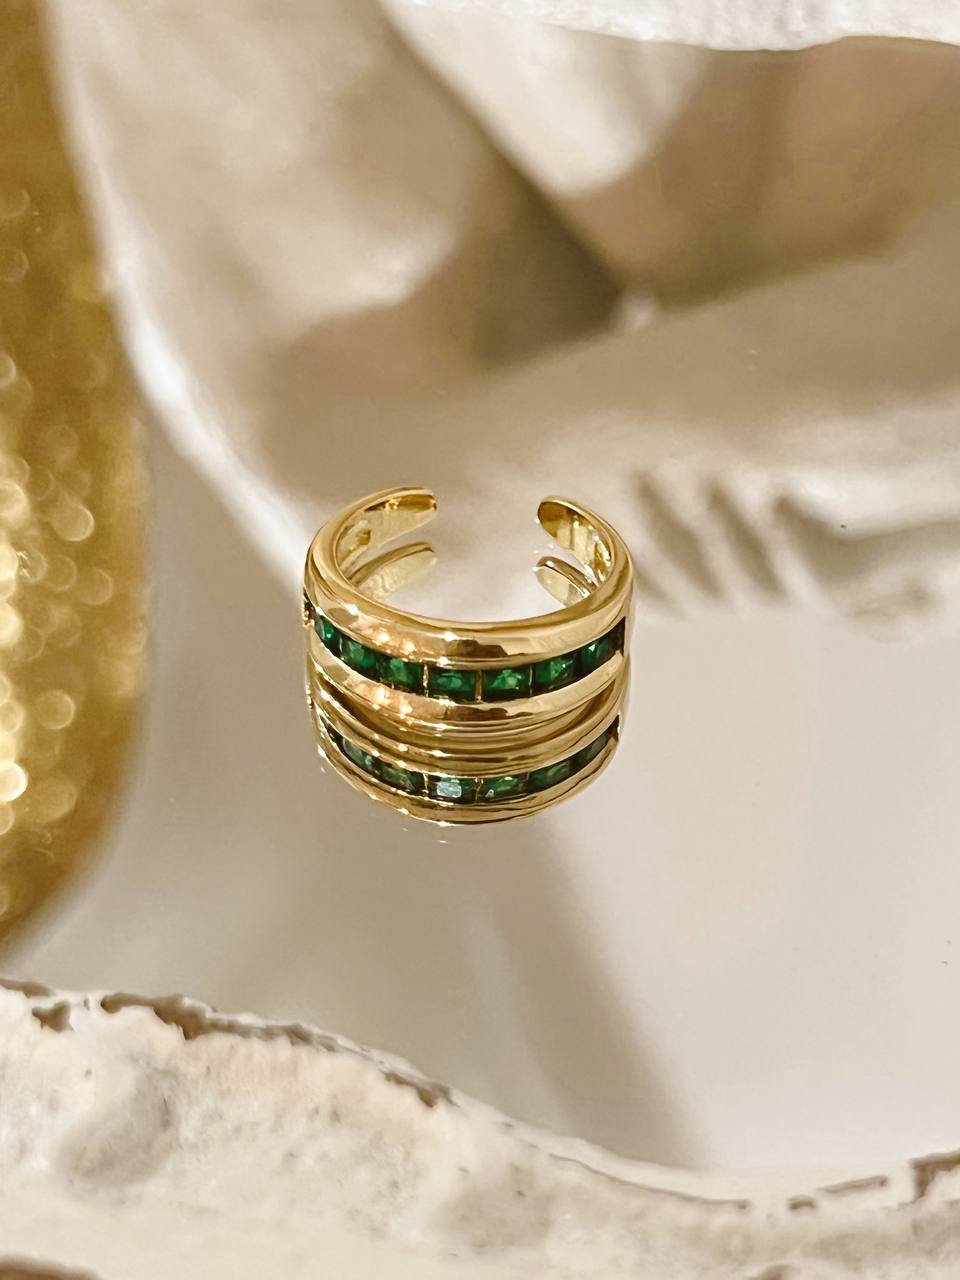 Ring with green stones